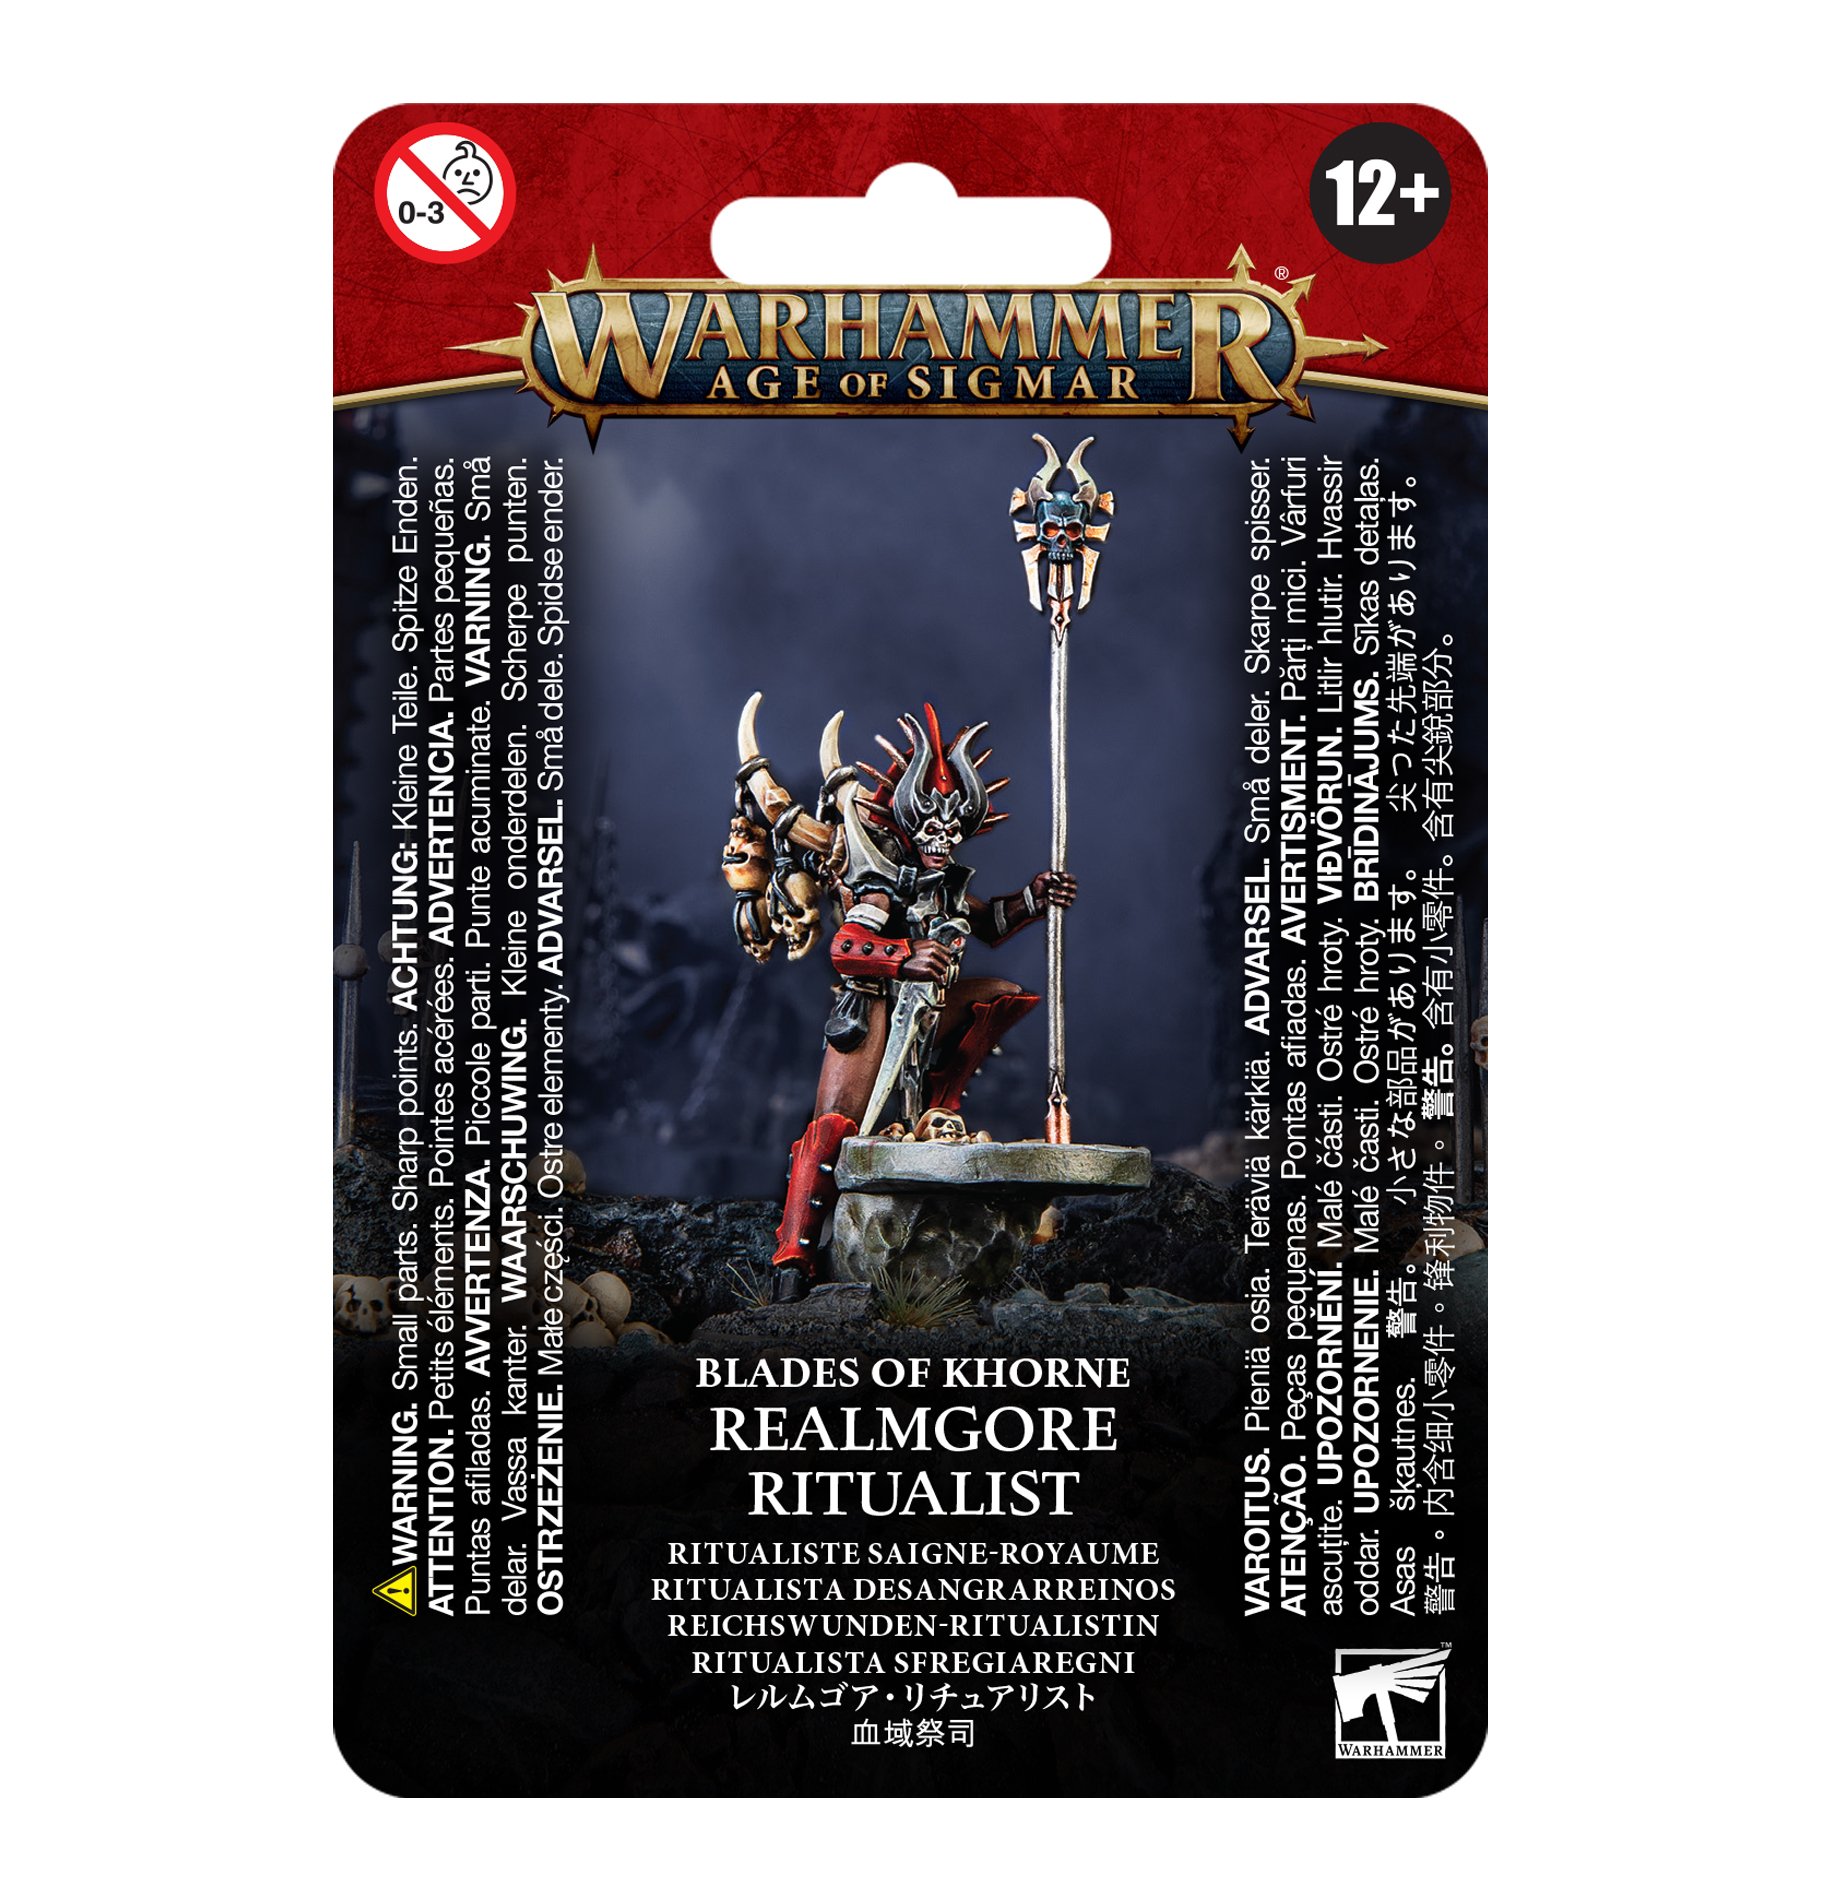 Realmgore Ritualist - 83-22 - Blades of Khorne - Warhammer Age of Sigmar